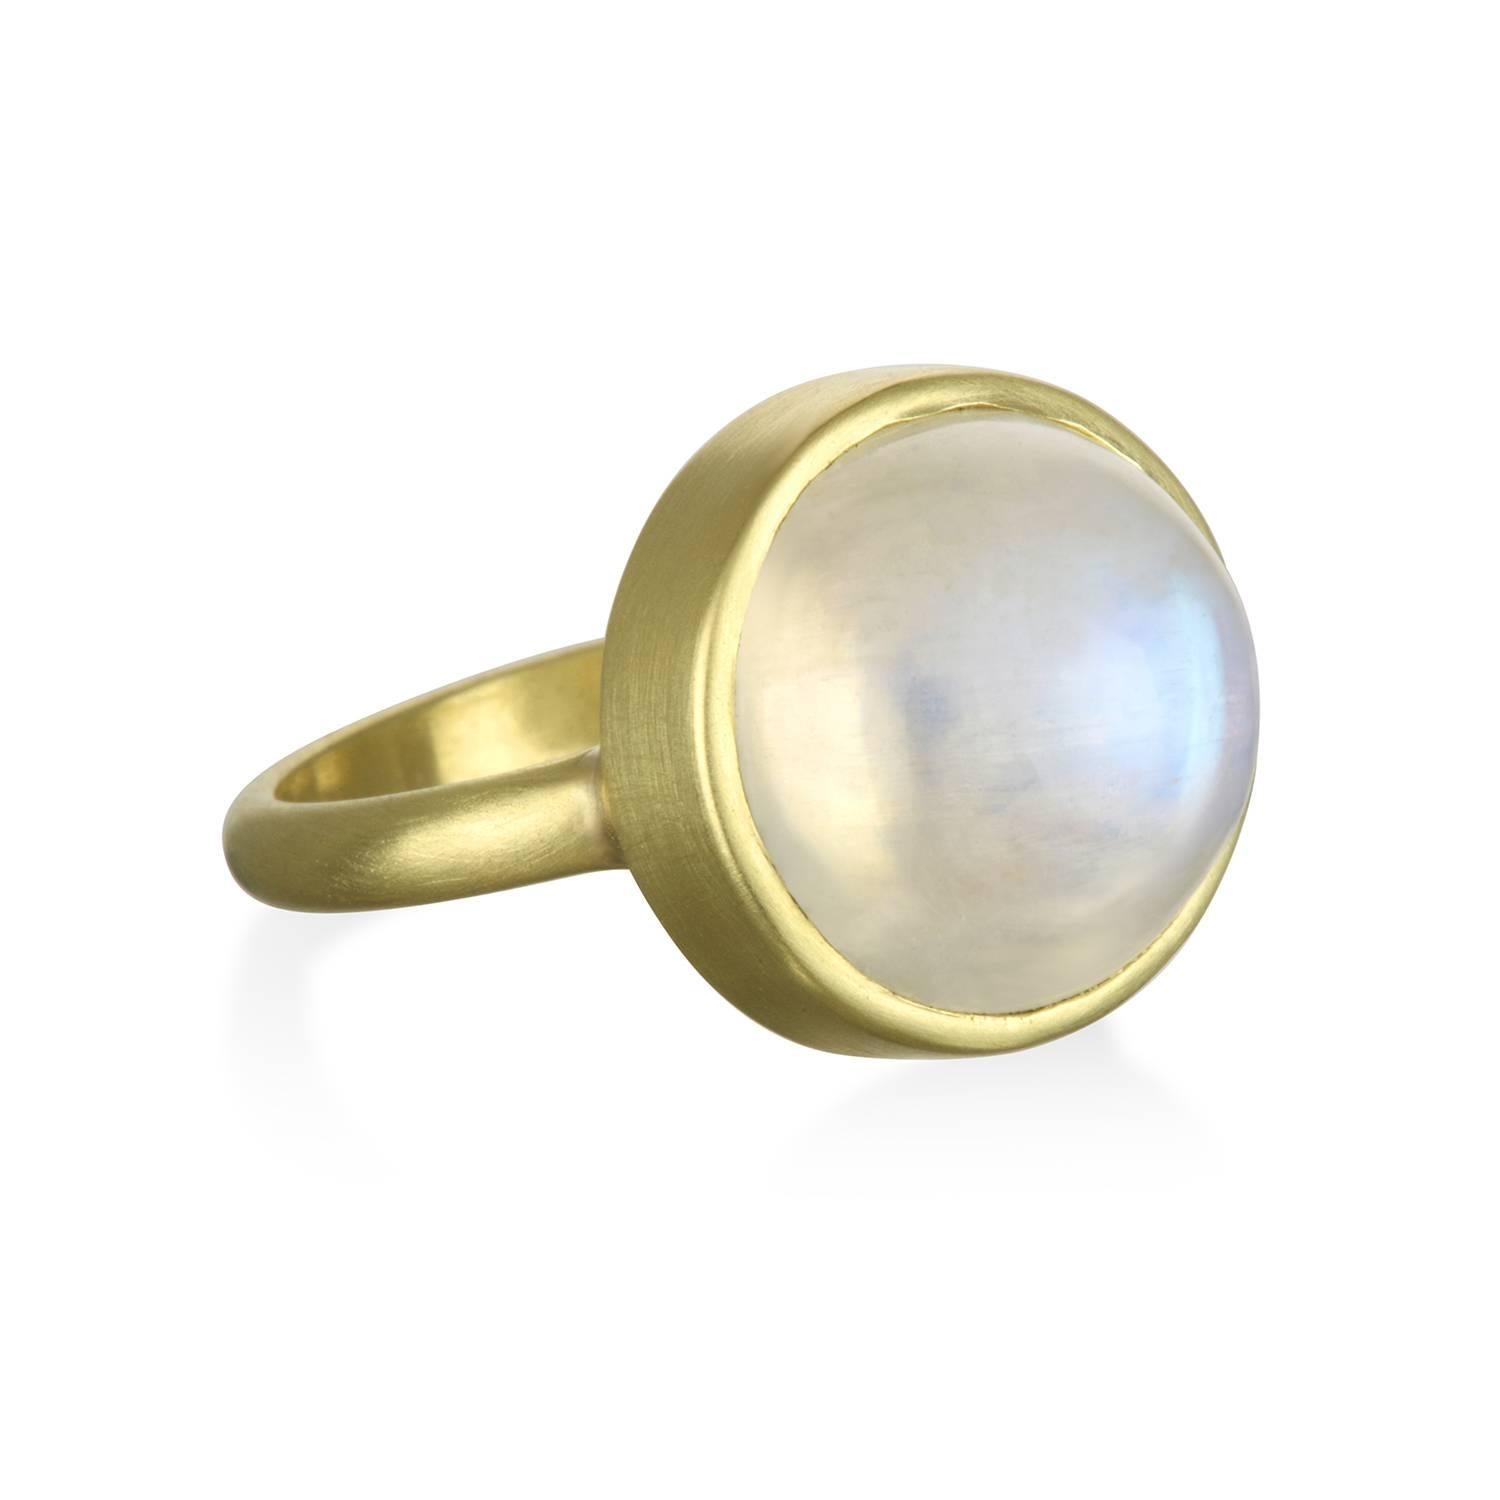 Handmade in 18k green* gold, set in a clean gold bezel with a simple half round band, this is at once classic and modern and so easy to wear!  15mm wide, Moonstone is 13.50 carats.  Shank is 2.5mm half round.  Size 7.  This ring can be